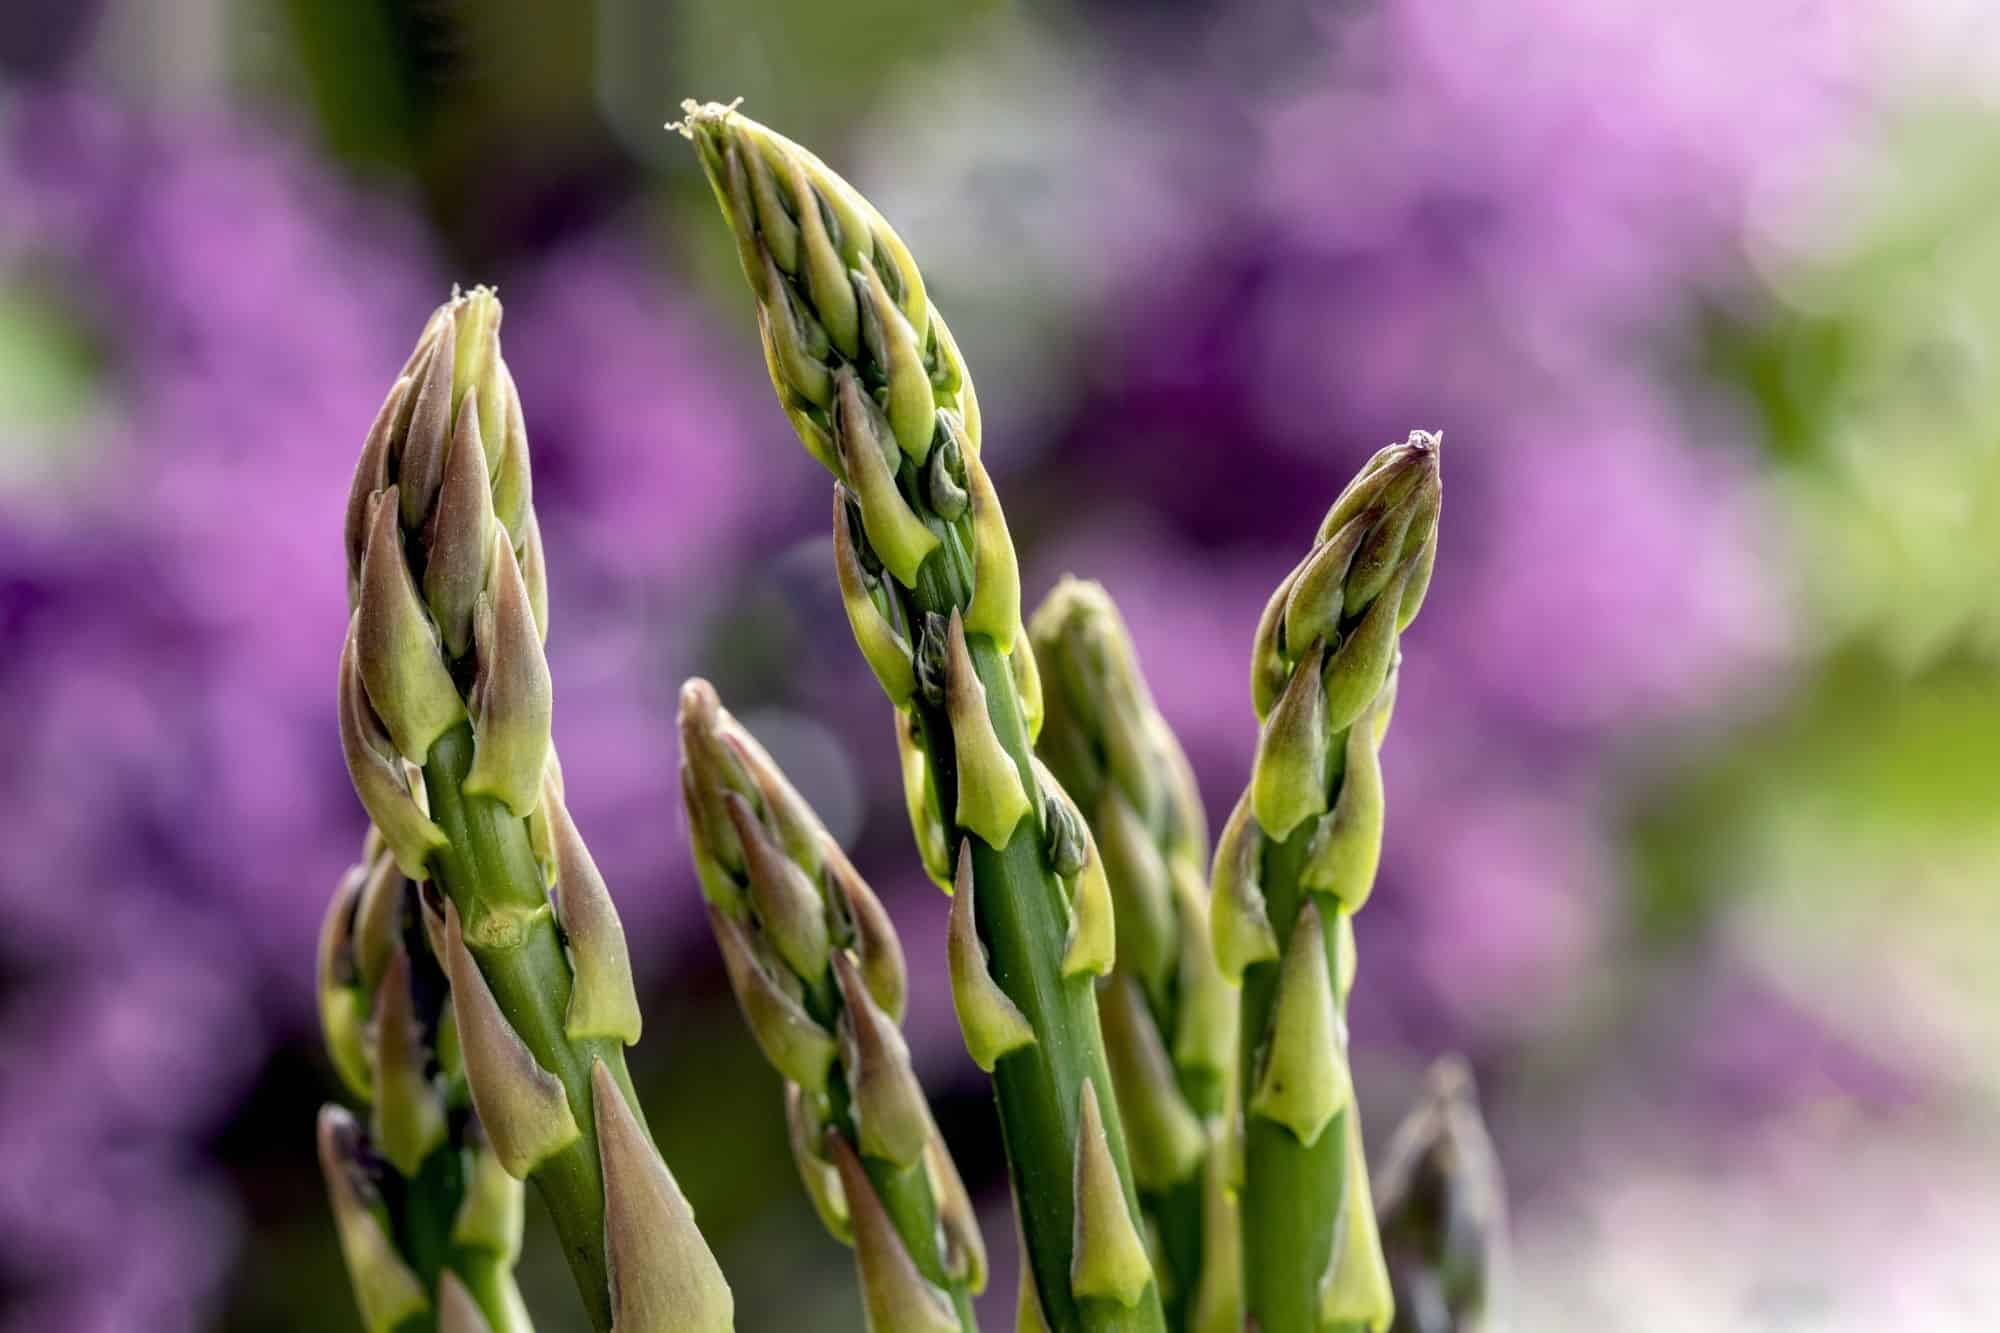 Asparagus spears with a blurred purple backdrop.